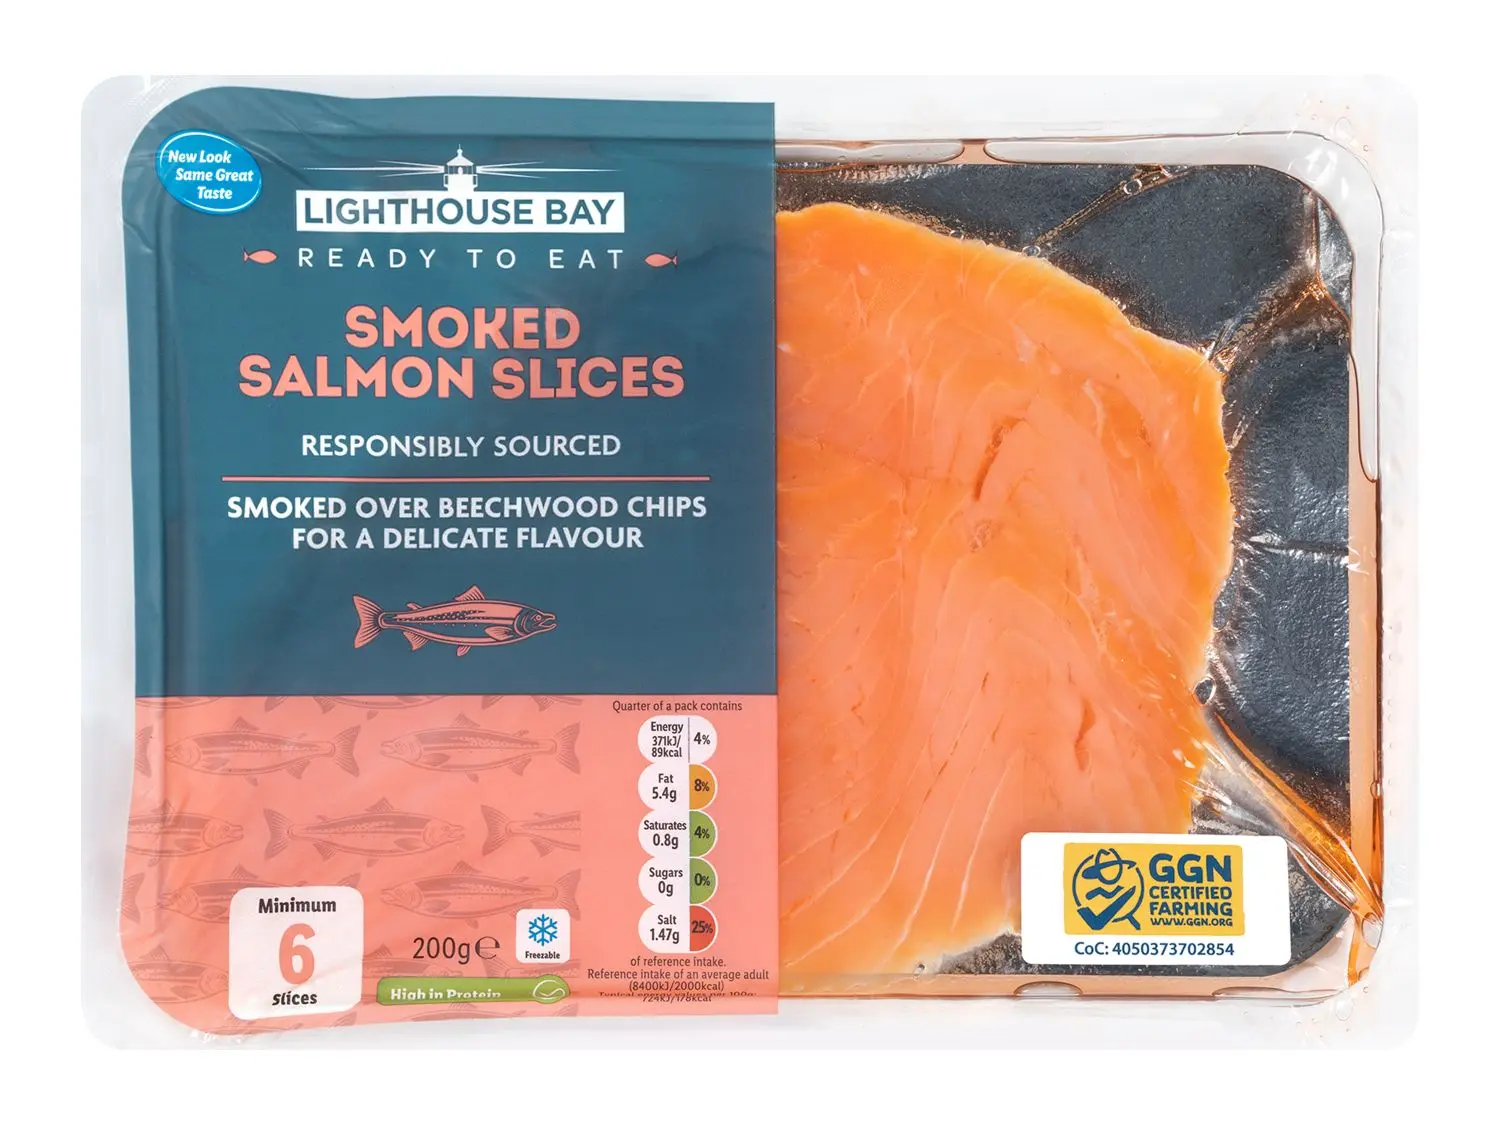 smoked salmon at lidl - Does Lidl sell salmon